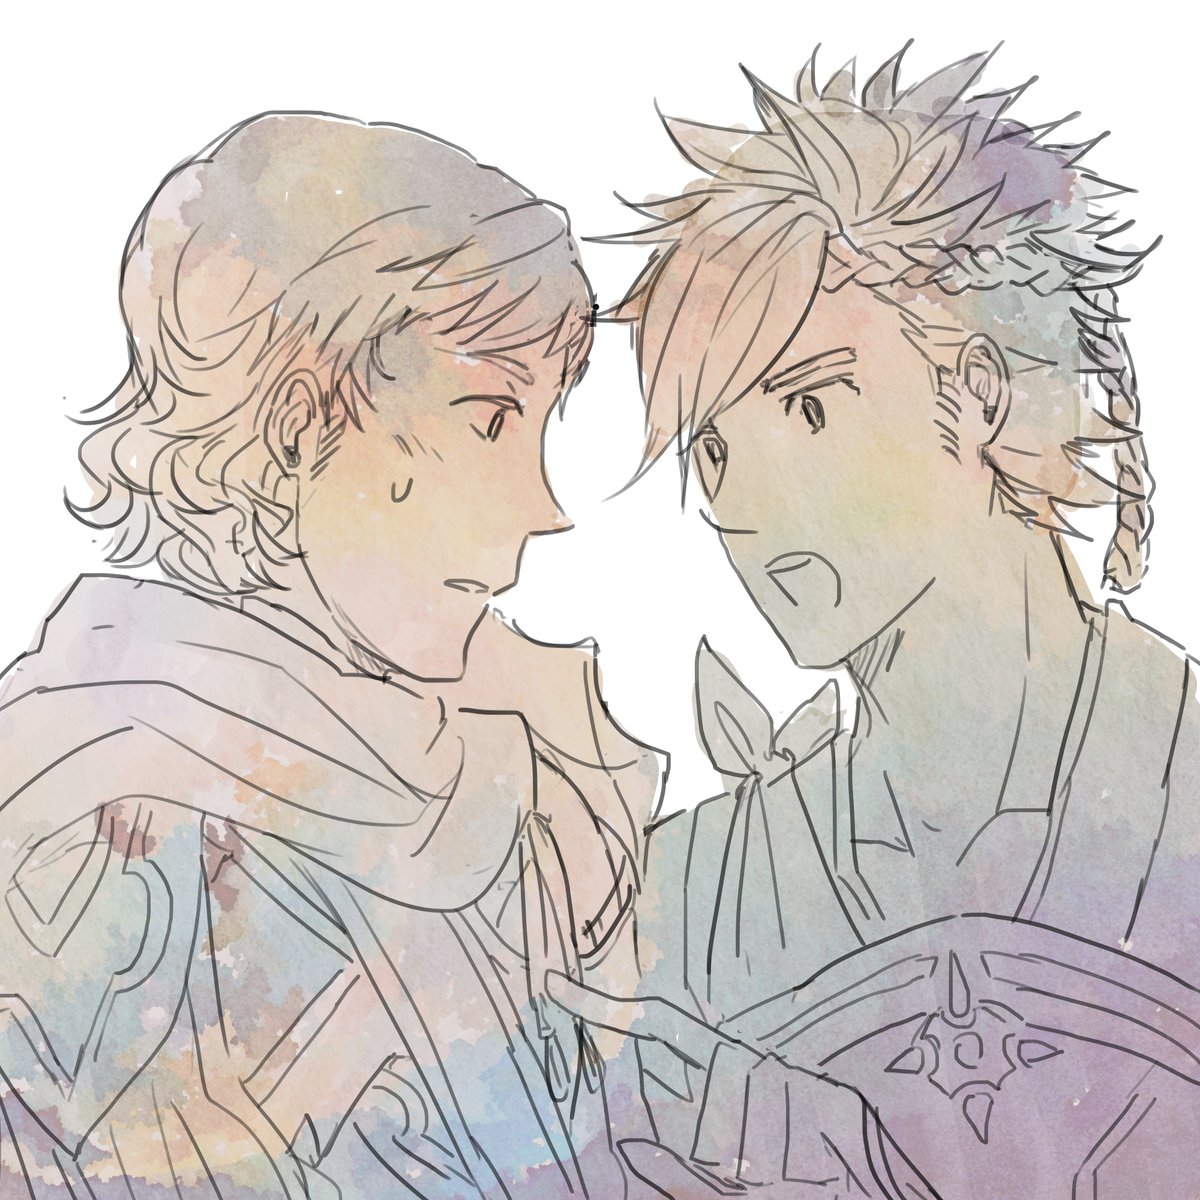 31. Shiro/Siegbert"You're the only Siegbert there is. So why compare yourself to someone else?"